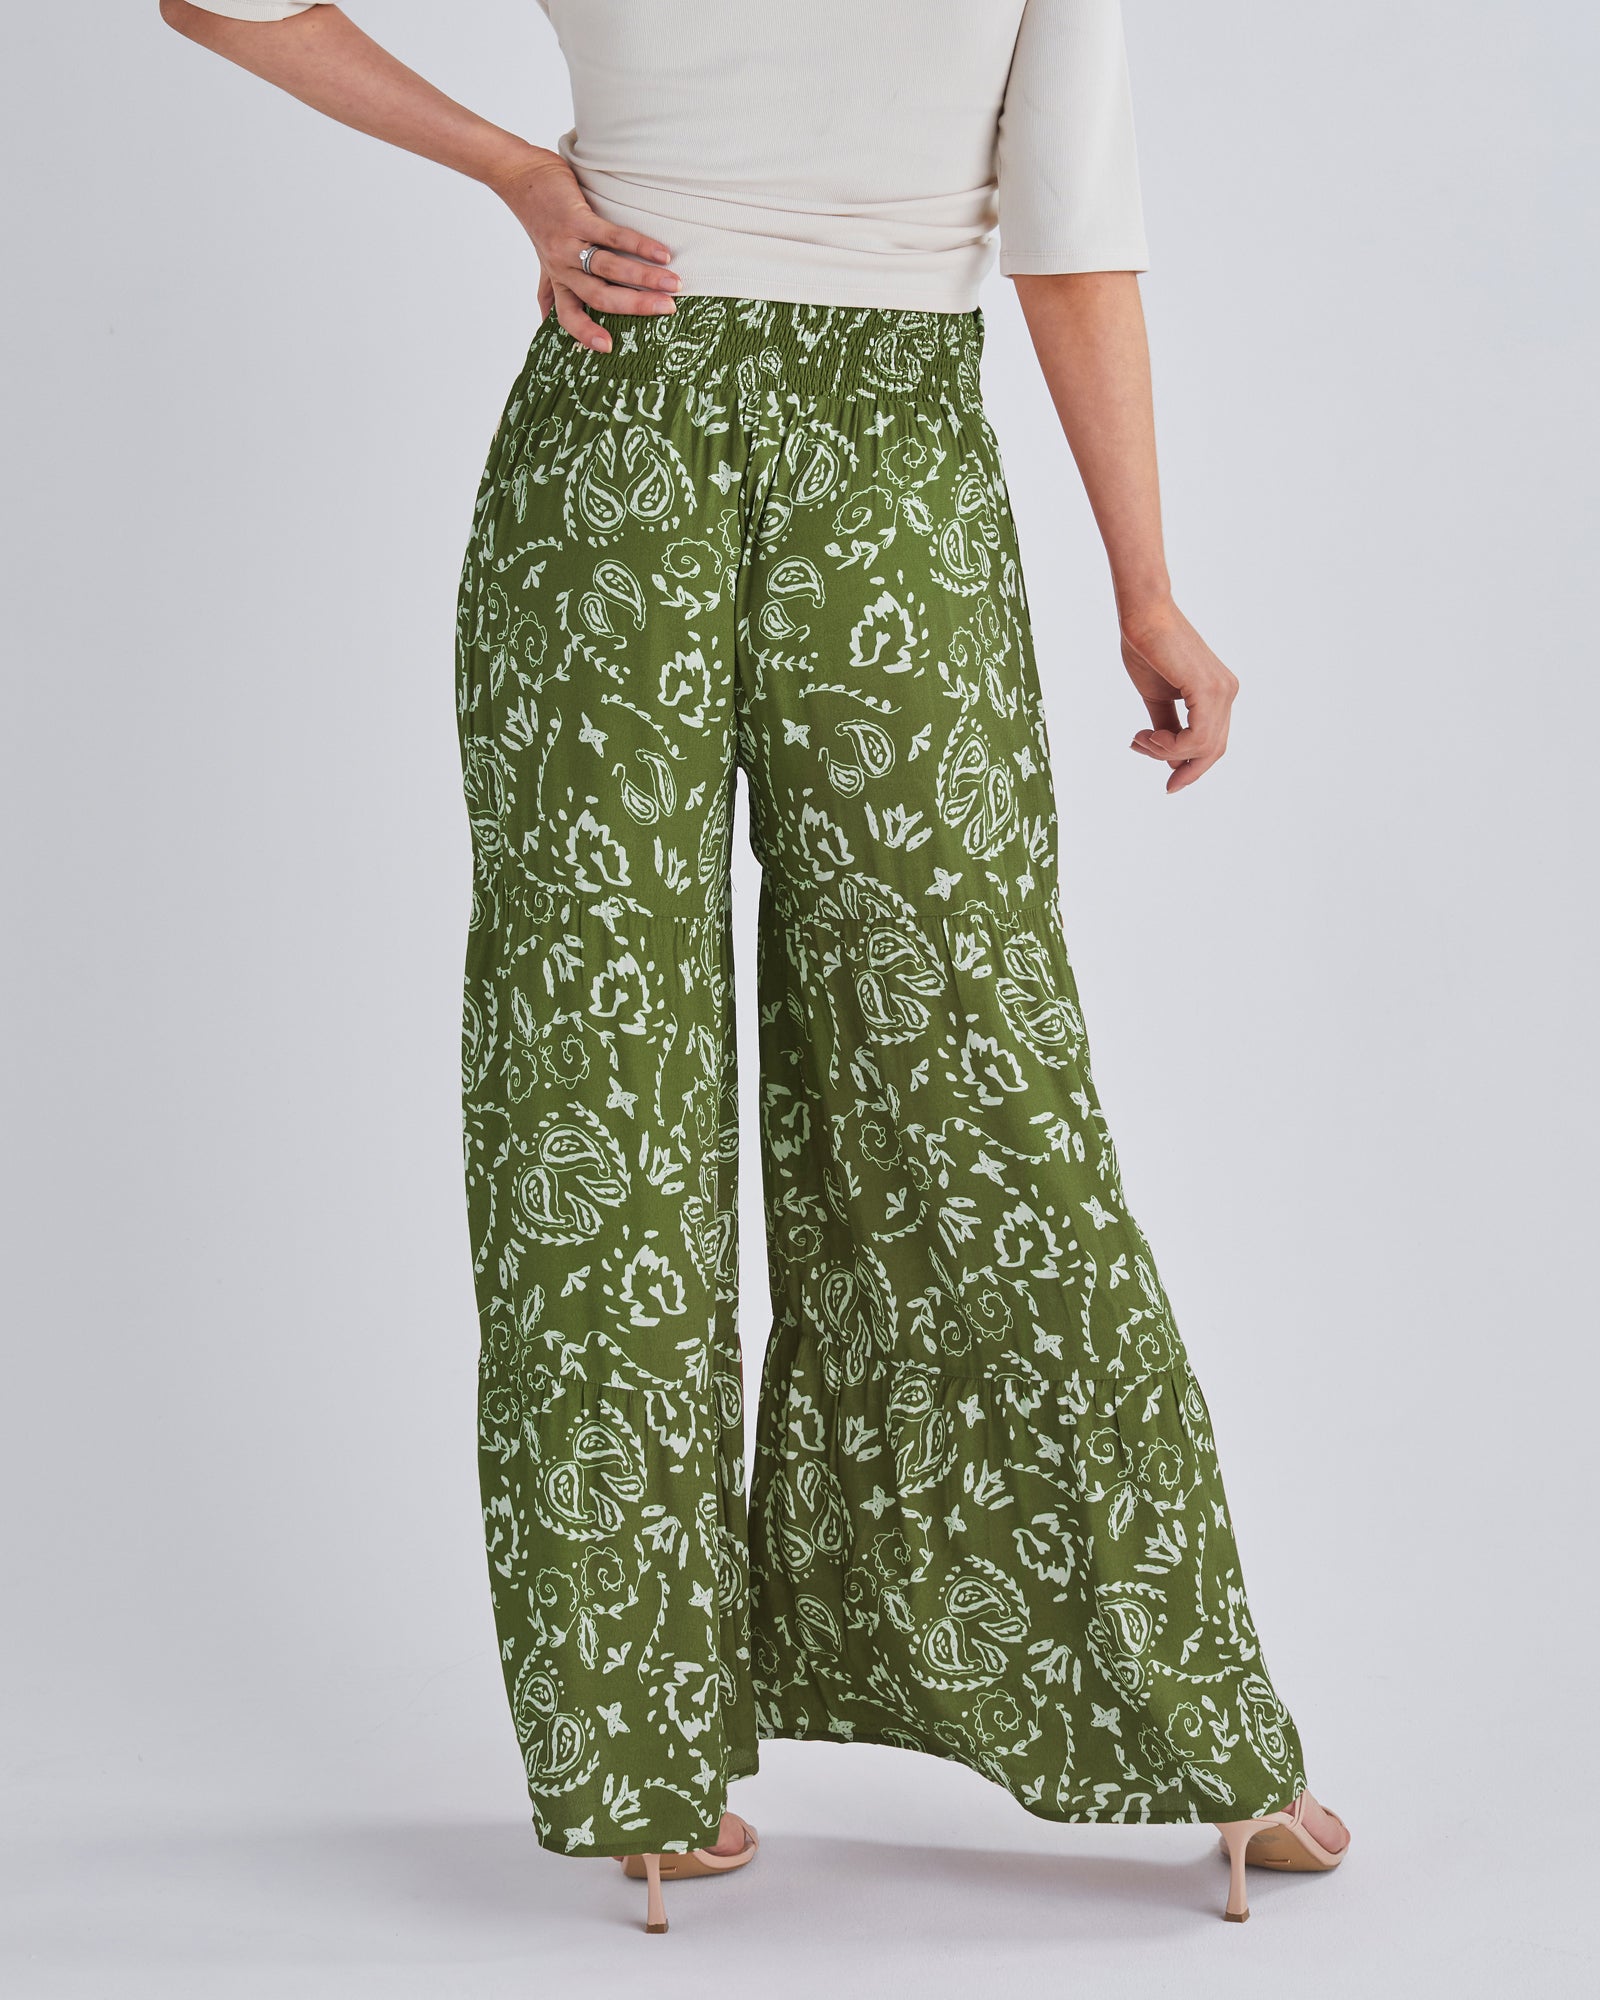 Back View - A pregnant Woman Wearing Stacie Wide Leg Green Maternity Pants in Paisley Print from Angel Maternity